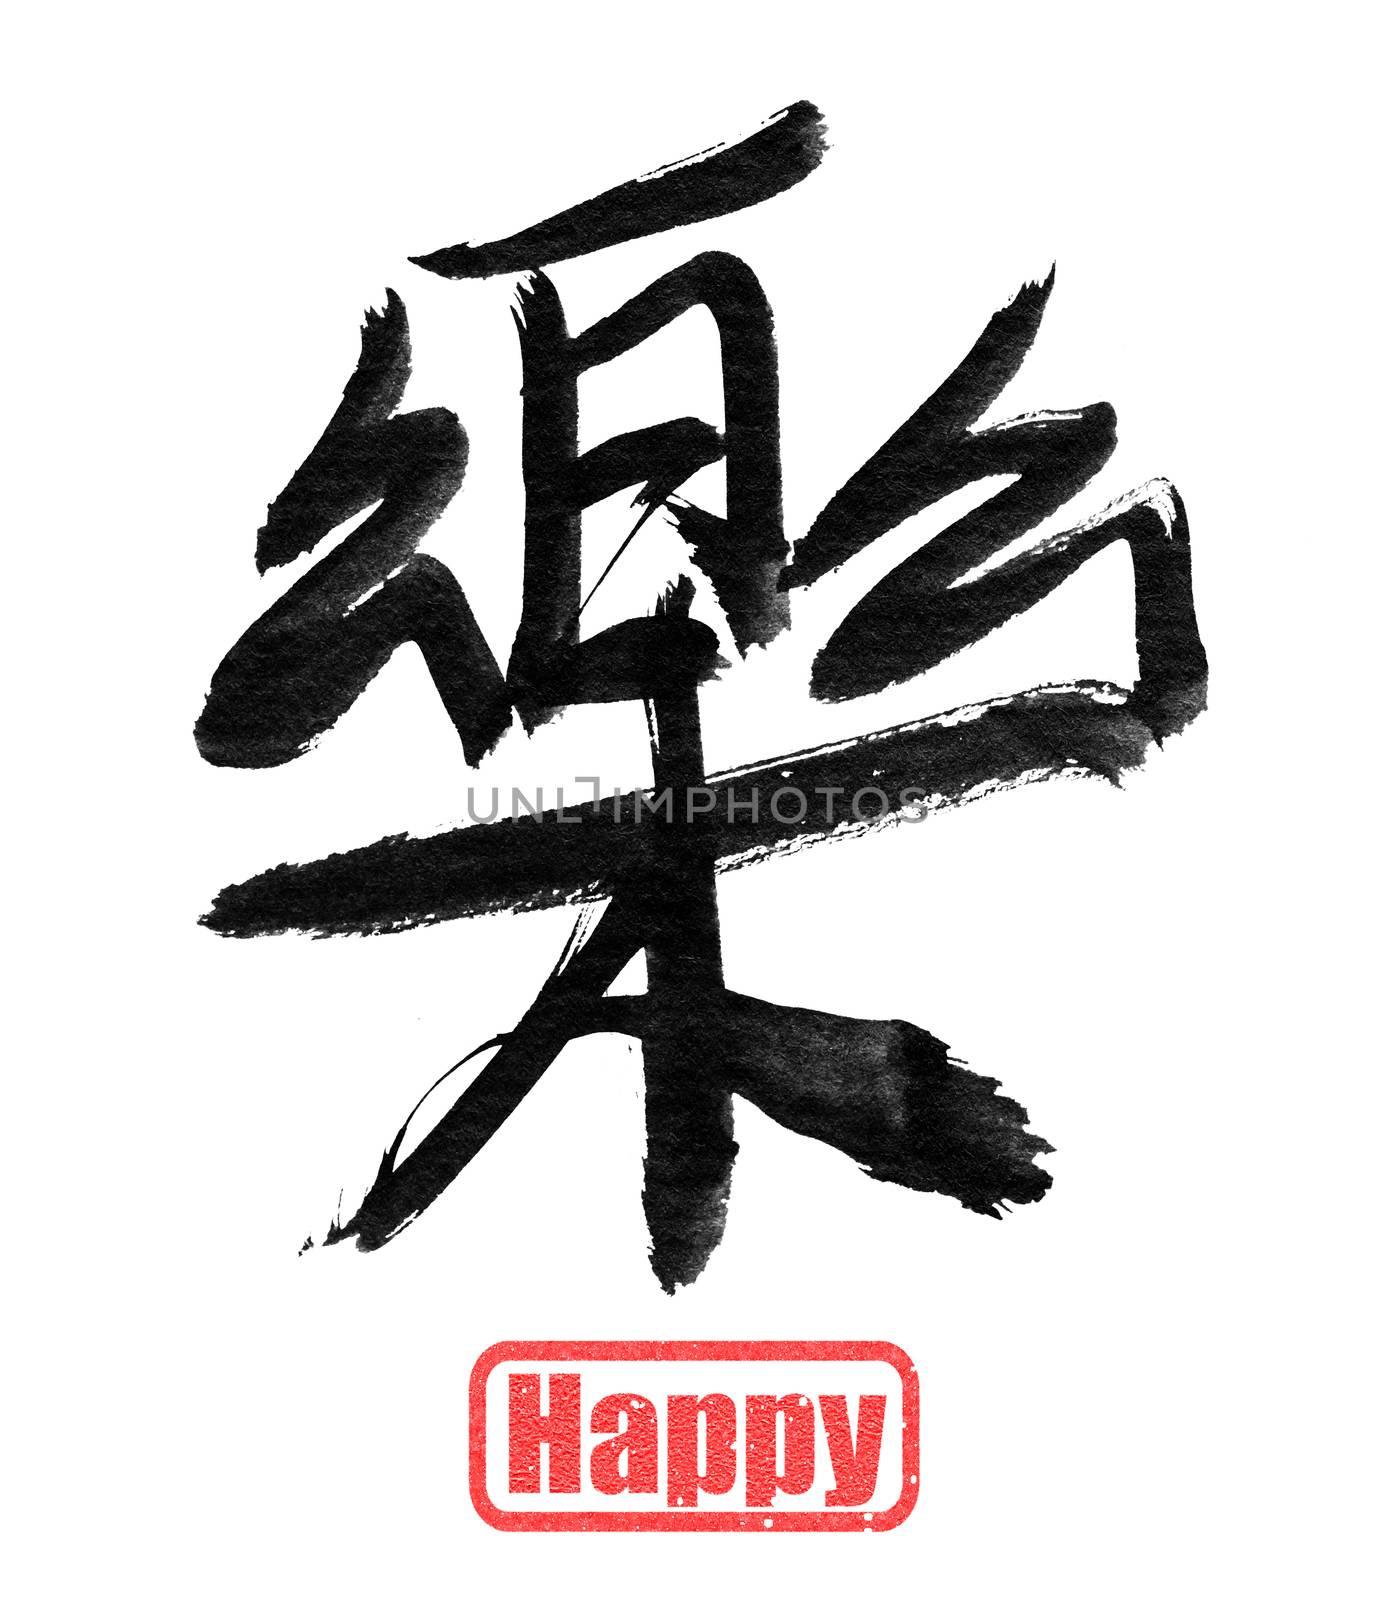 happy, traditional chinese calligraphy art isolated on white background.